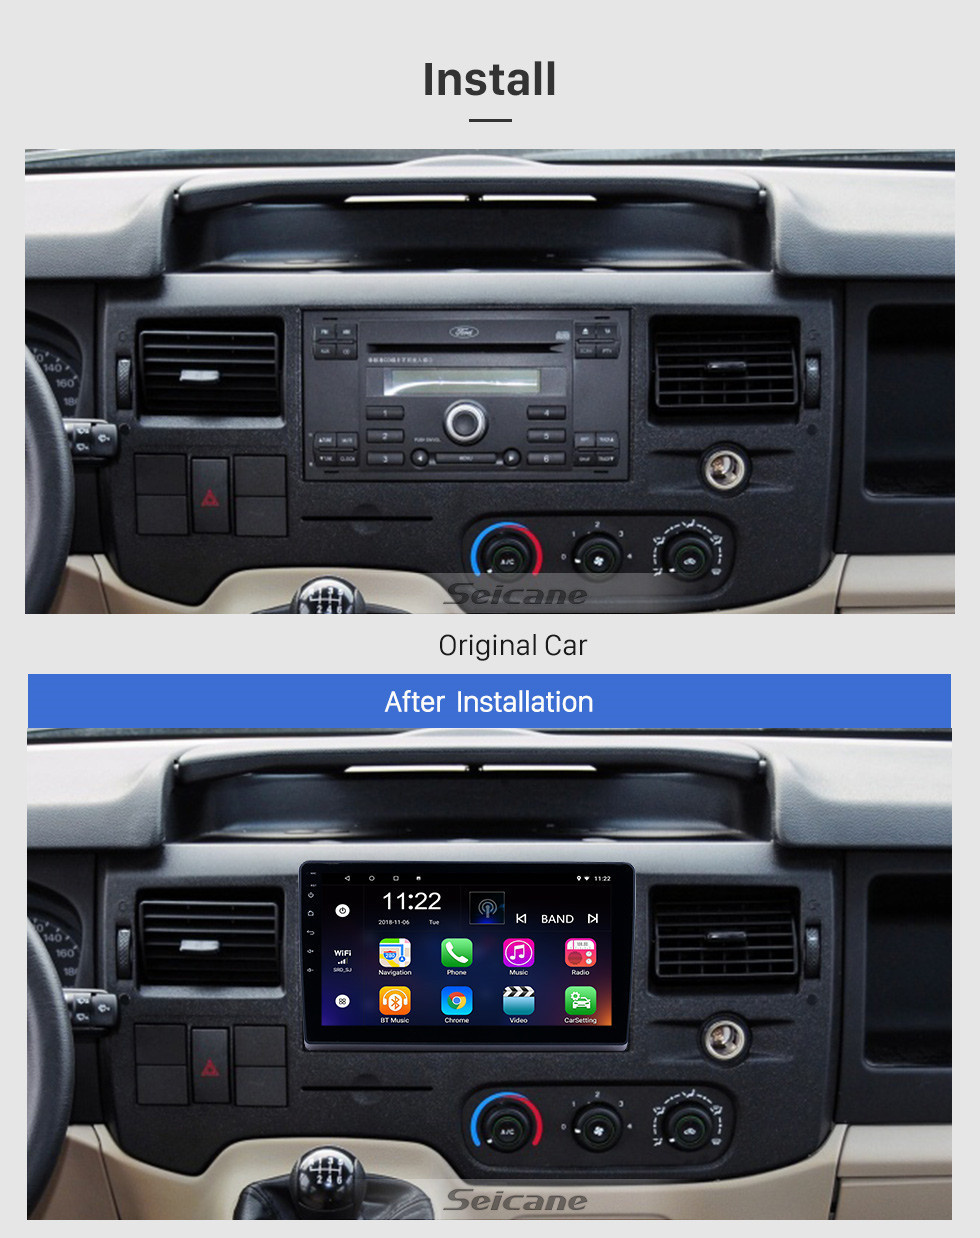 Seicane 10.1 inch Android 13.0 Radio for 2009-2019 Ford New Transit Bluetooth WIFI HD Touchscreen GPS Navigation Carplay USB support TPMS DAB+